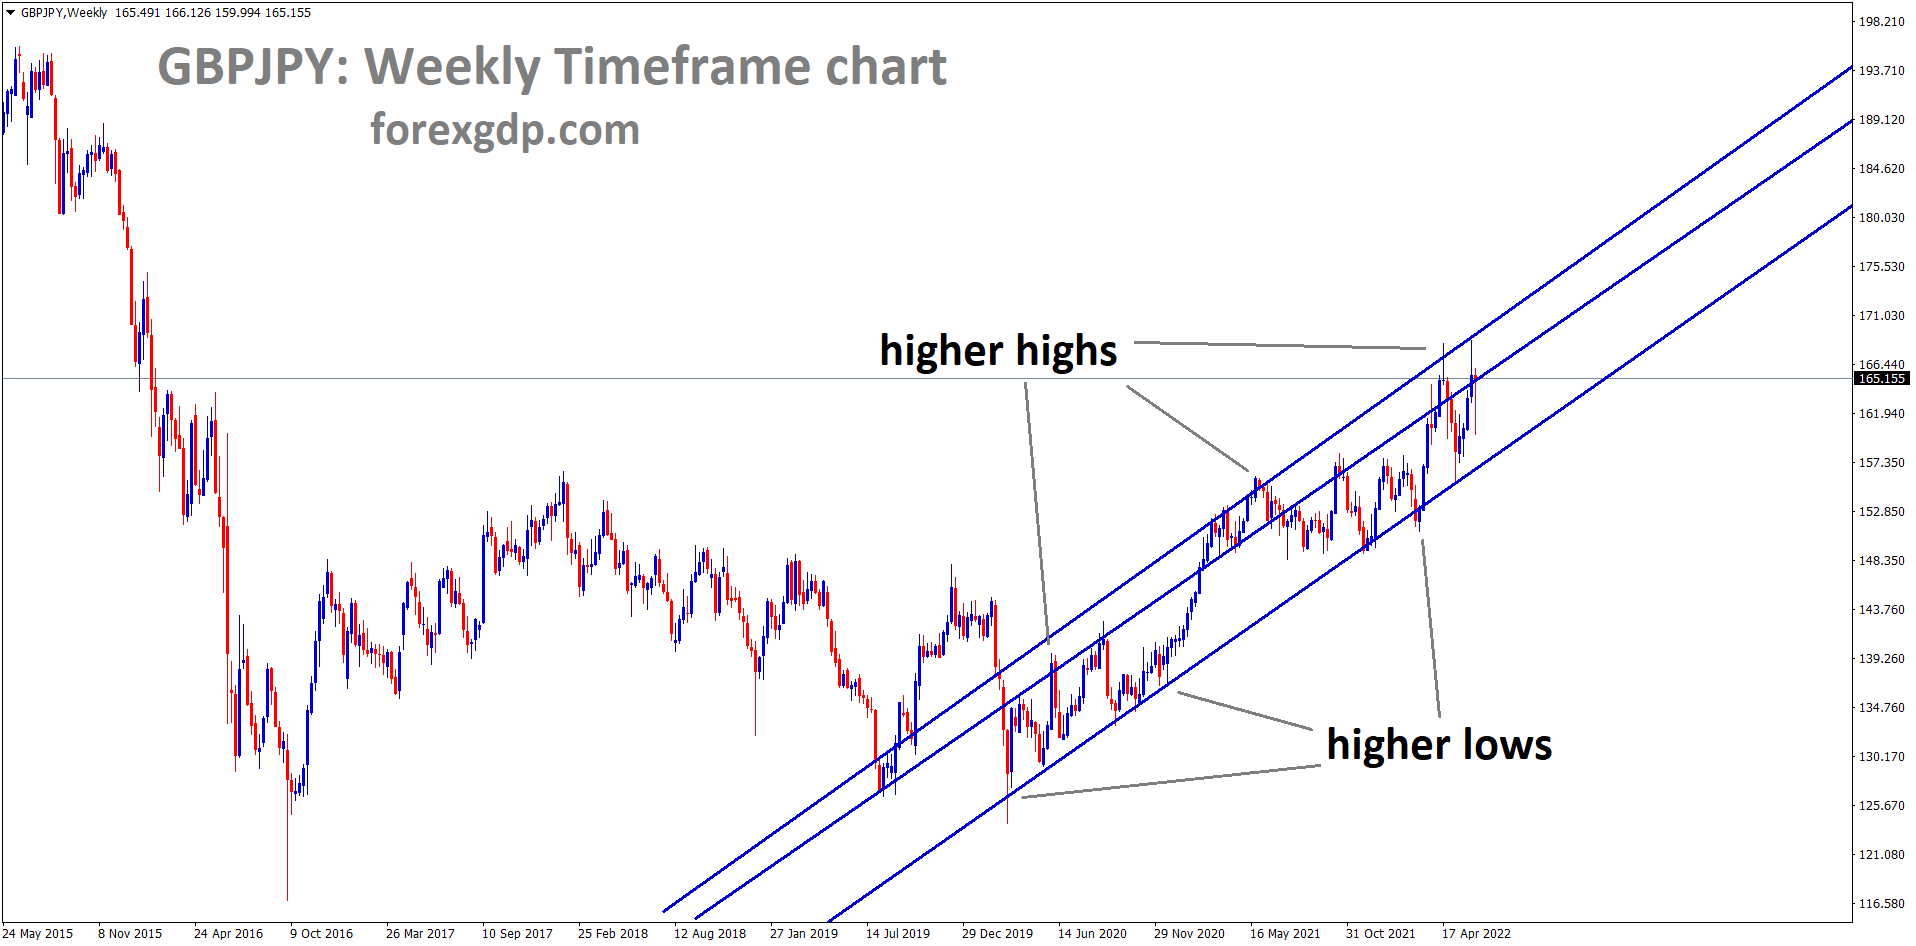 GBPJPY Weekly timeframe chart showing bullish market conditions